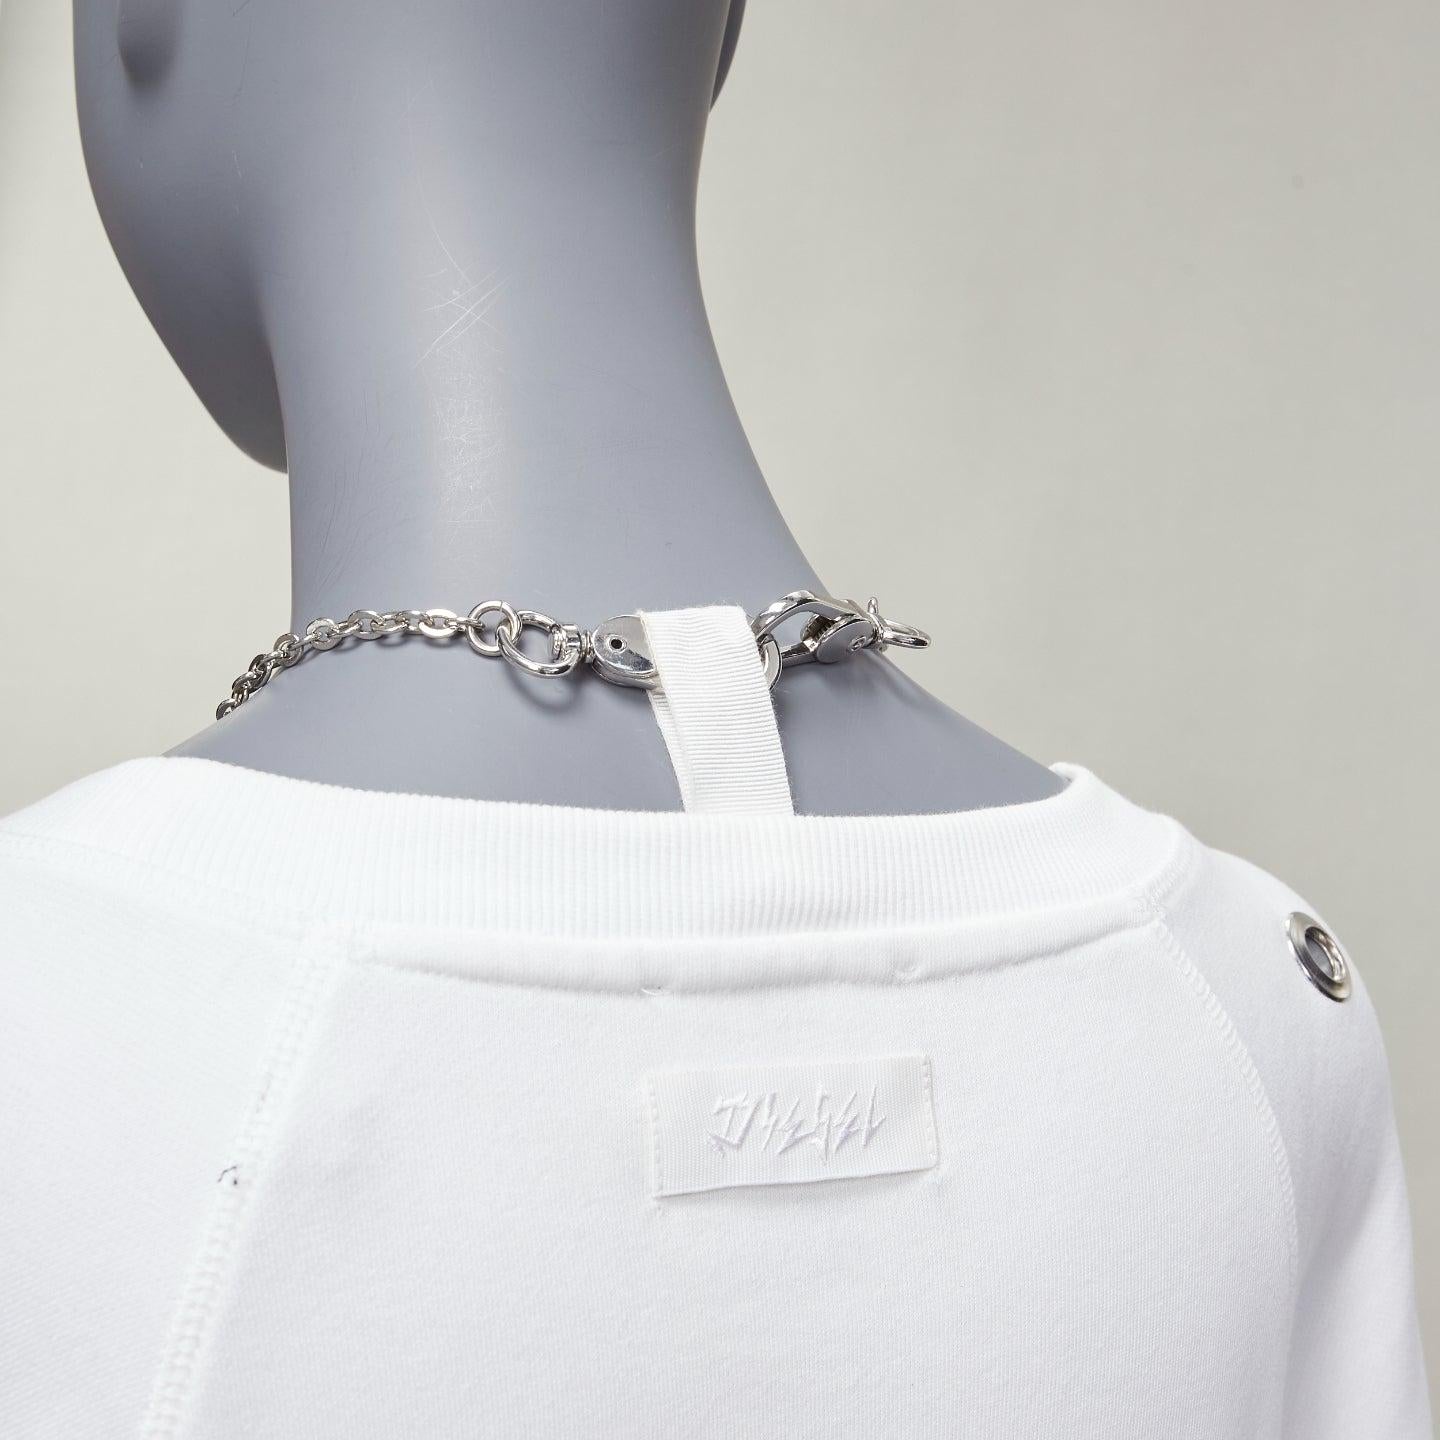 DIESEL 2023 Glenn Martens white silver punk chain grommet oversized sweatshirt XS
Reference: AAWC/A01134
Brand: Diesel
Collection: 2023
Material: Cotton
Color: White, Silver
Pattern: Solid
Closure: Pullover
Extra Details: Logo at back with some